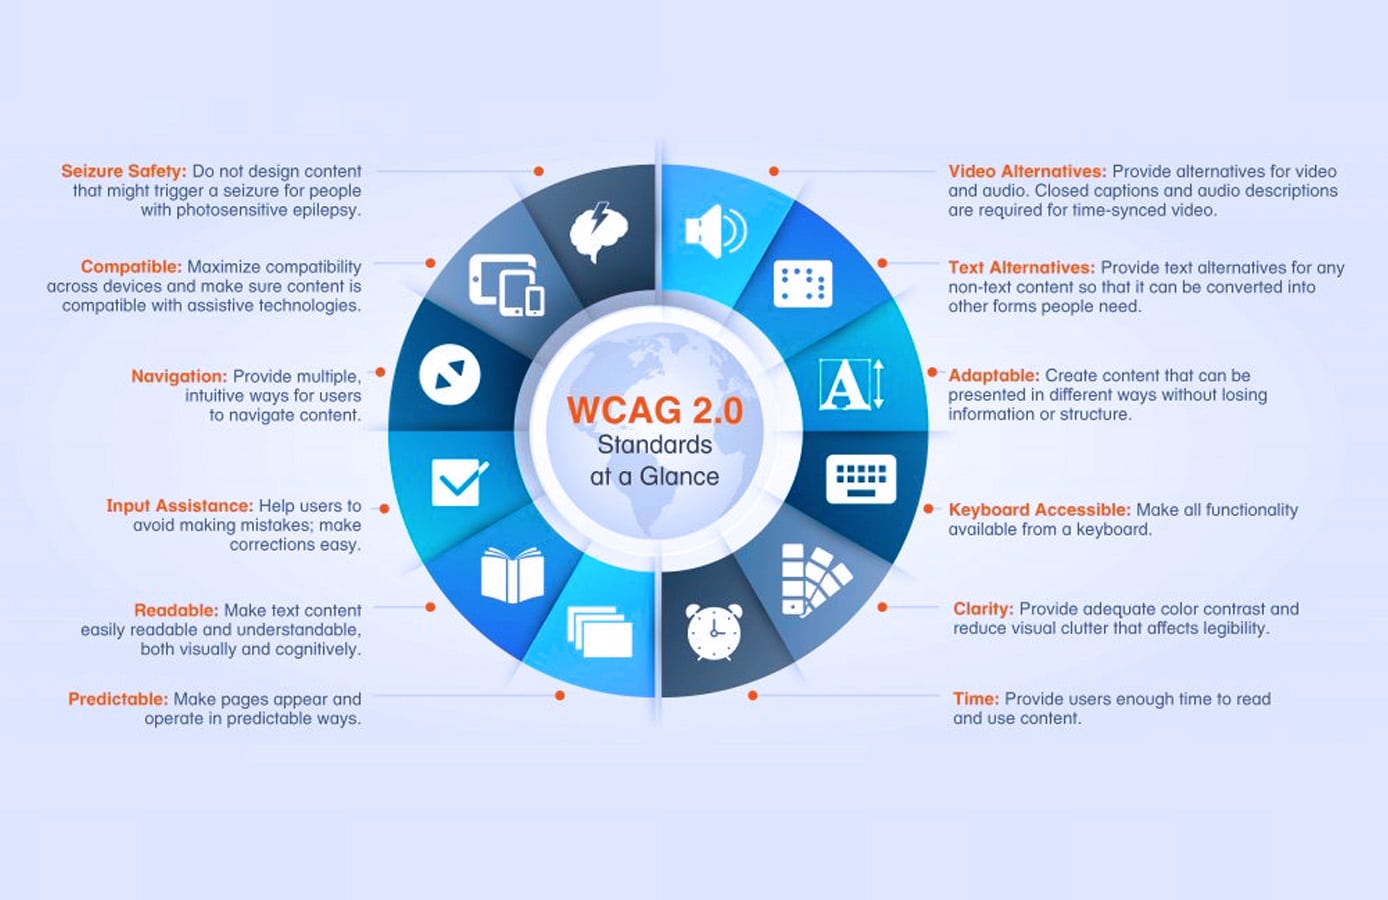 WCAG Standards at a Glance